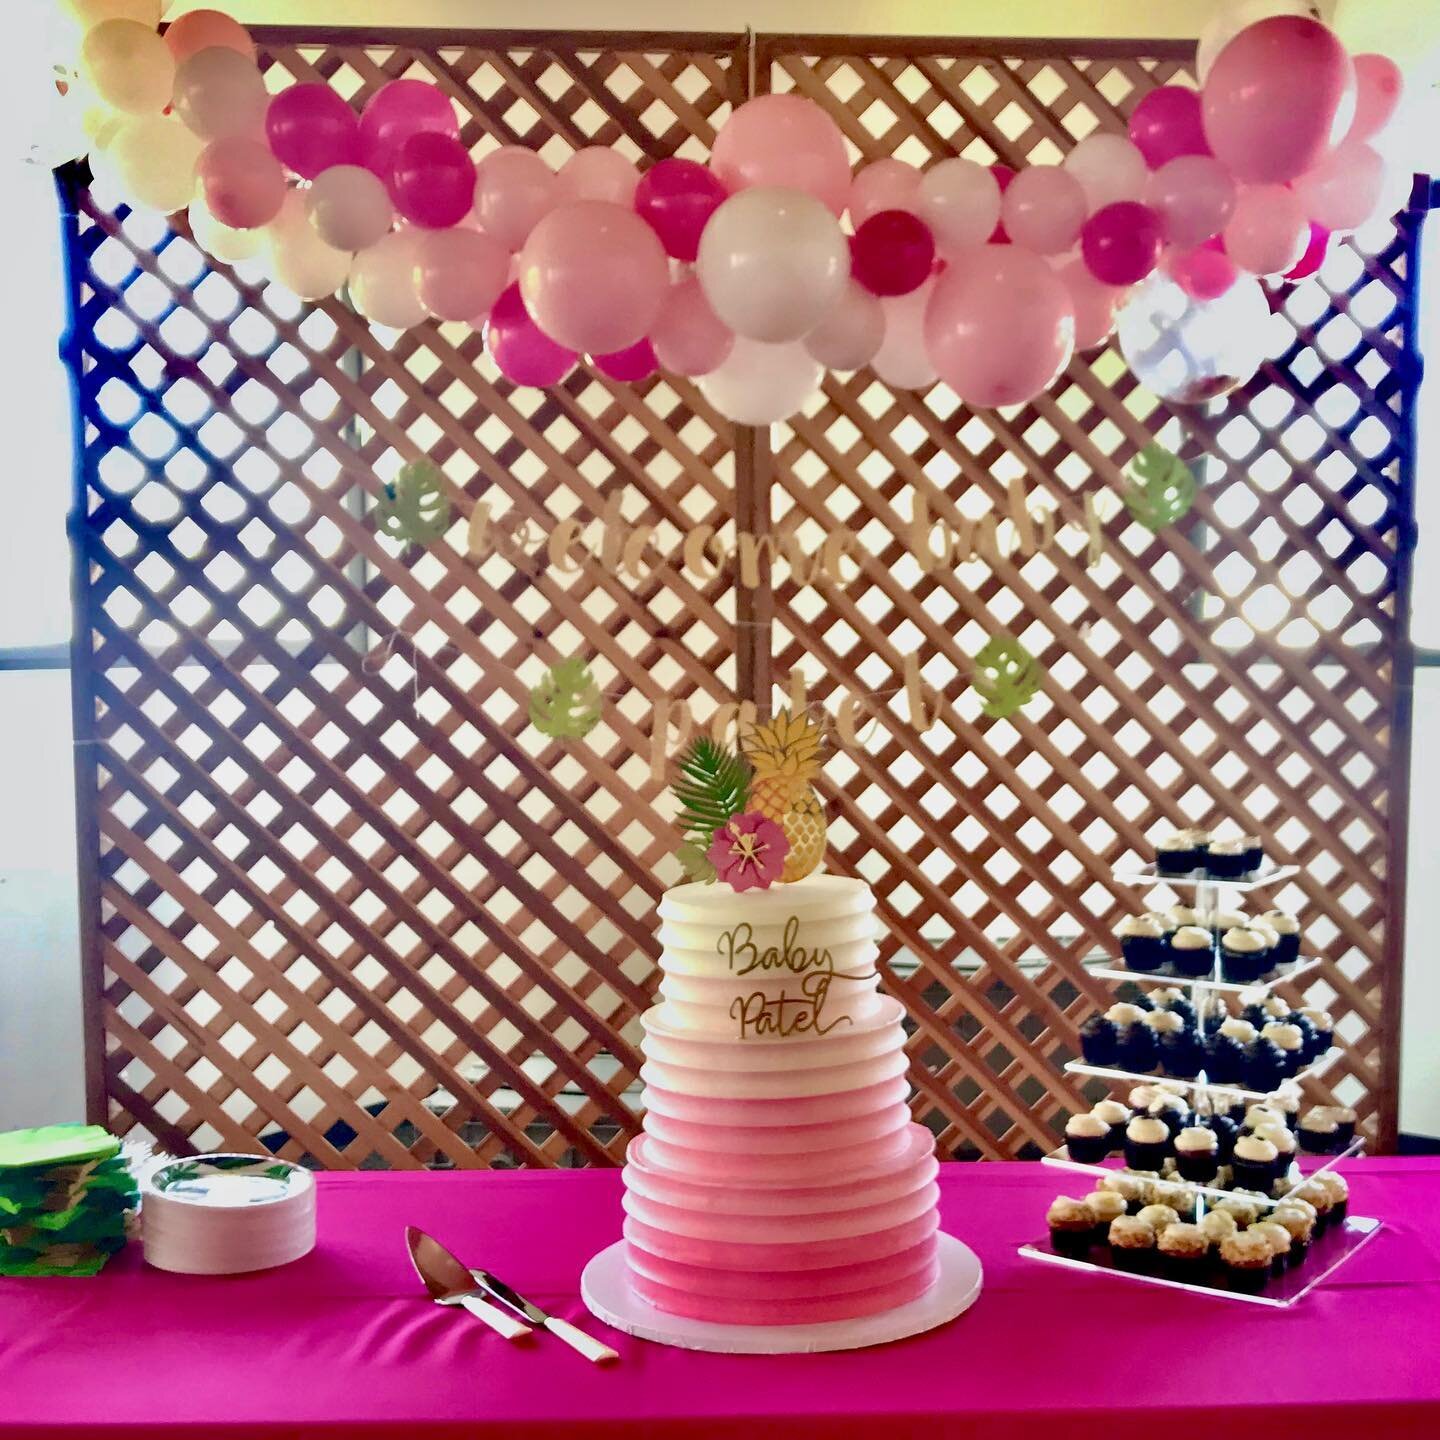 Set up a gorgeous cake cutting setting here at The Catalina Room! Throw a party you&rsquo;ll never forget.